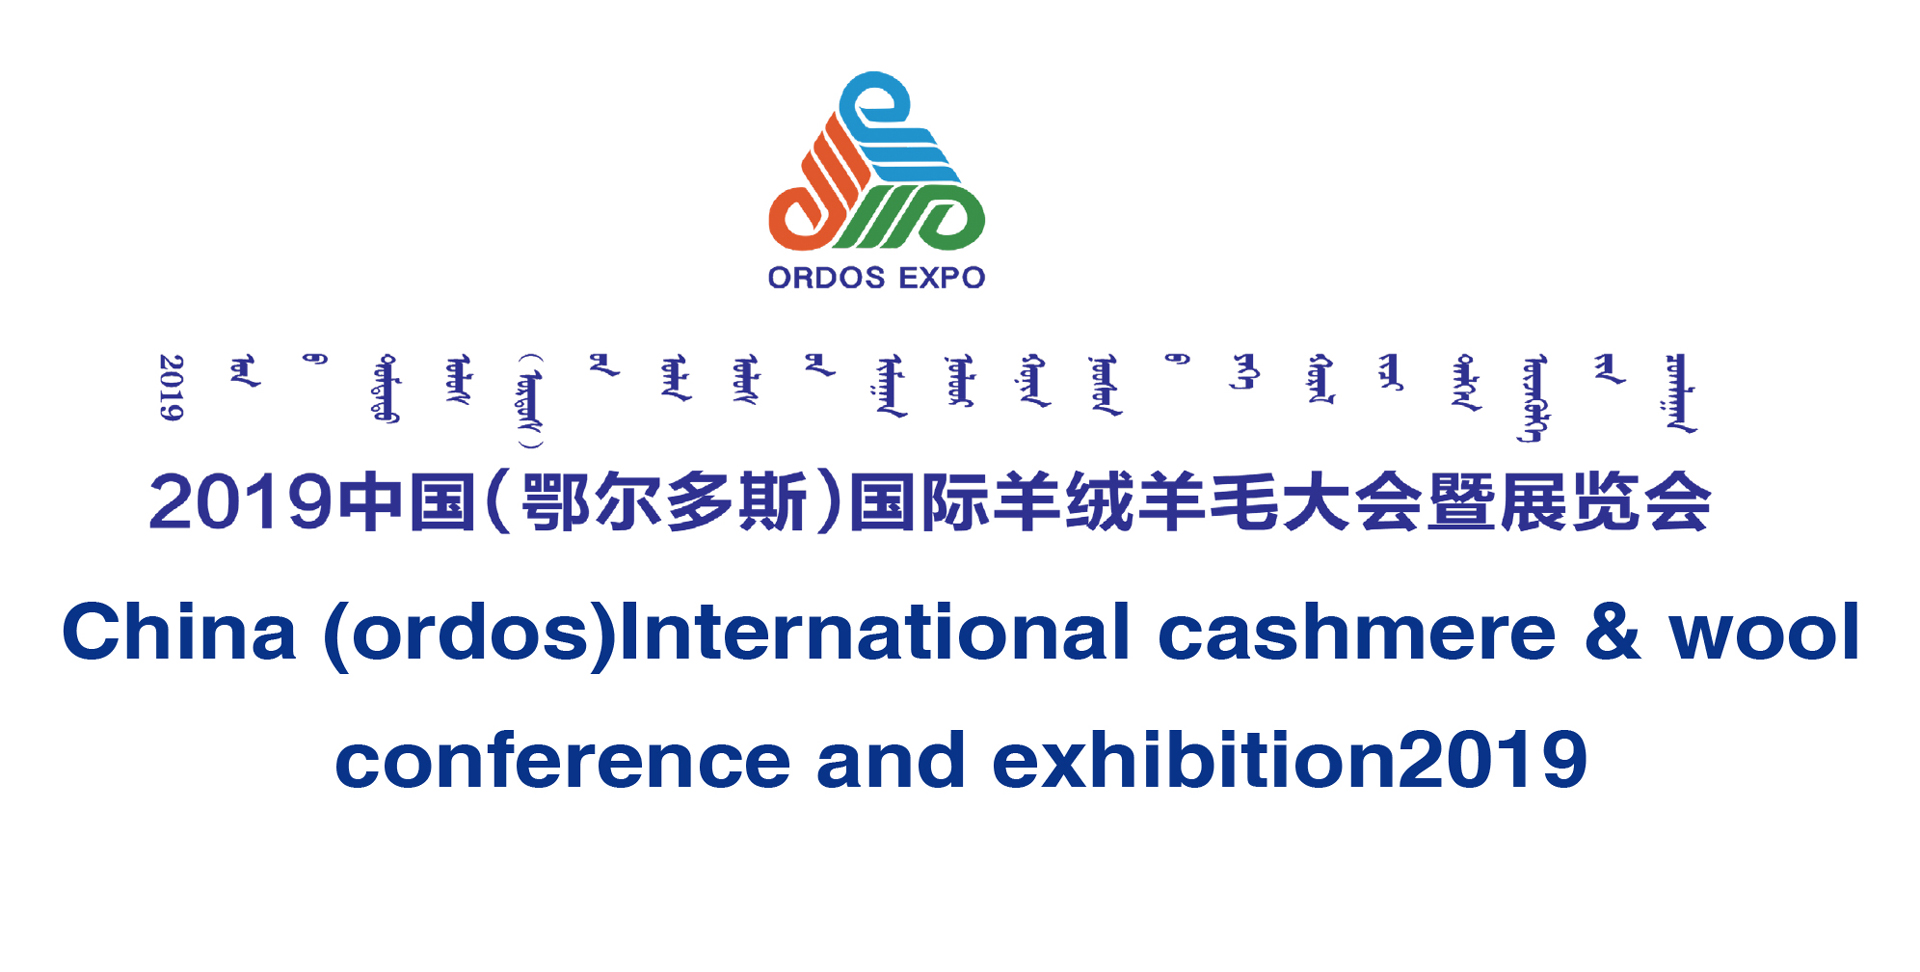 2019china-international-cashmere-and-wool-expo-1.jpg